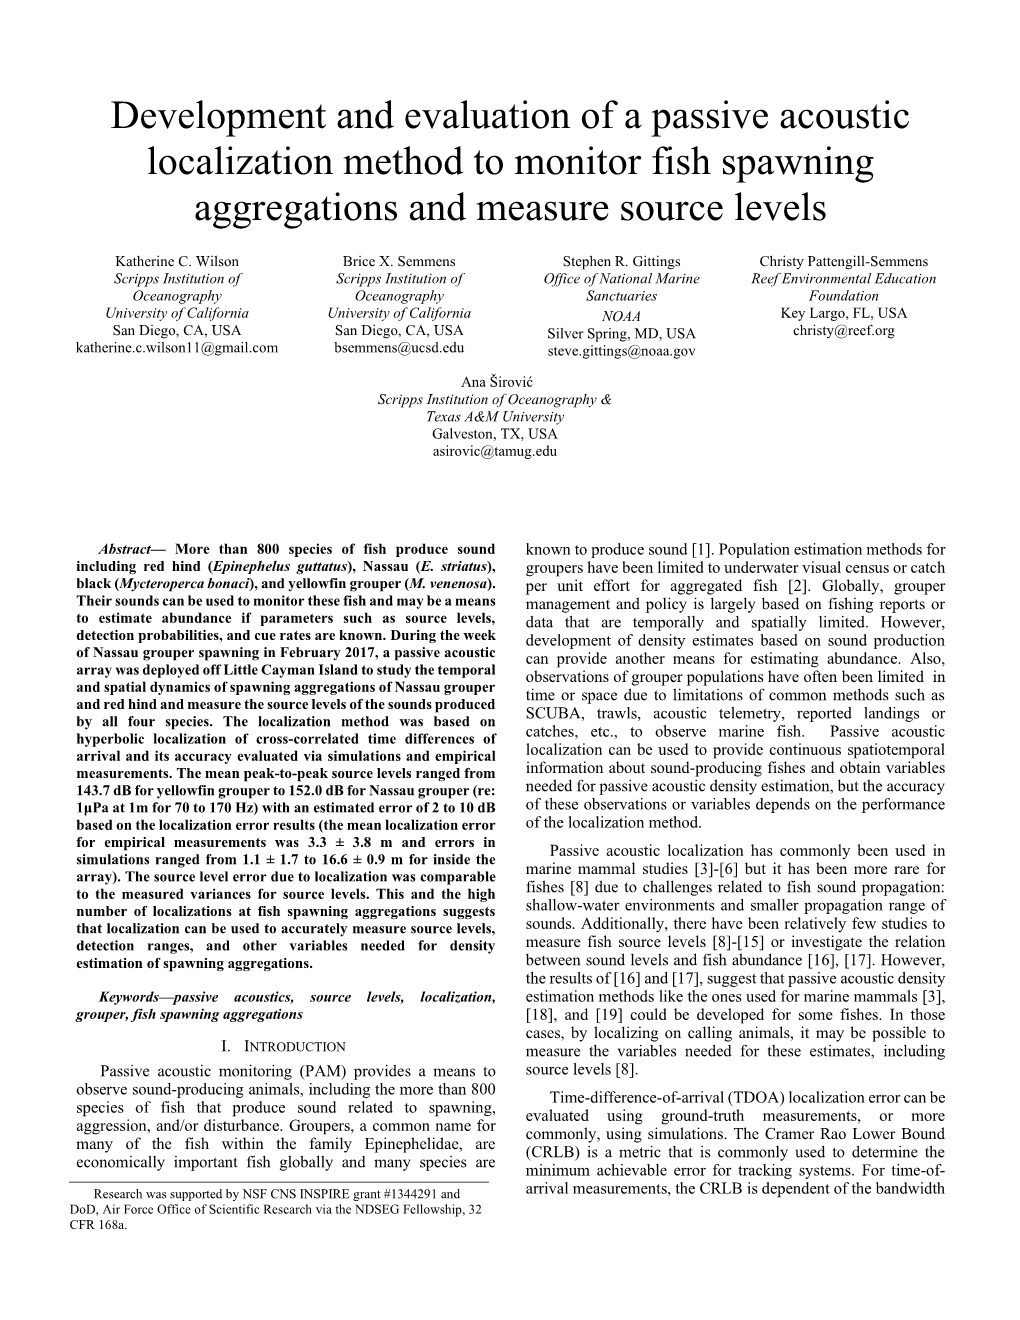 Development and Evaluation of a Passive Acoustic Localization Method to Monitor Fish Spawning Aggregations and Measure Source Levels